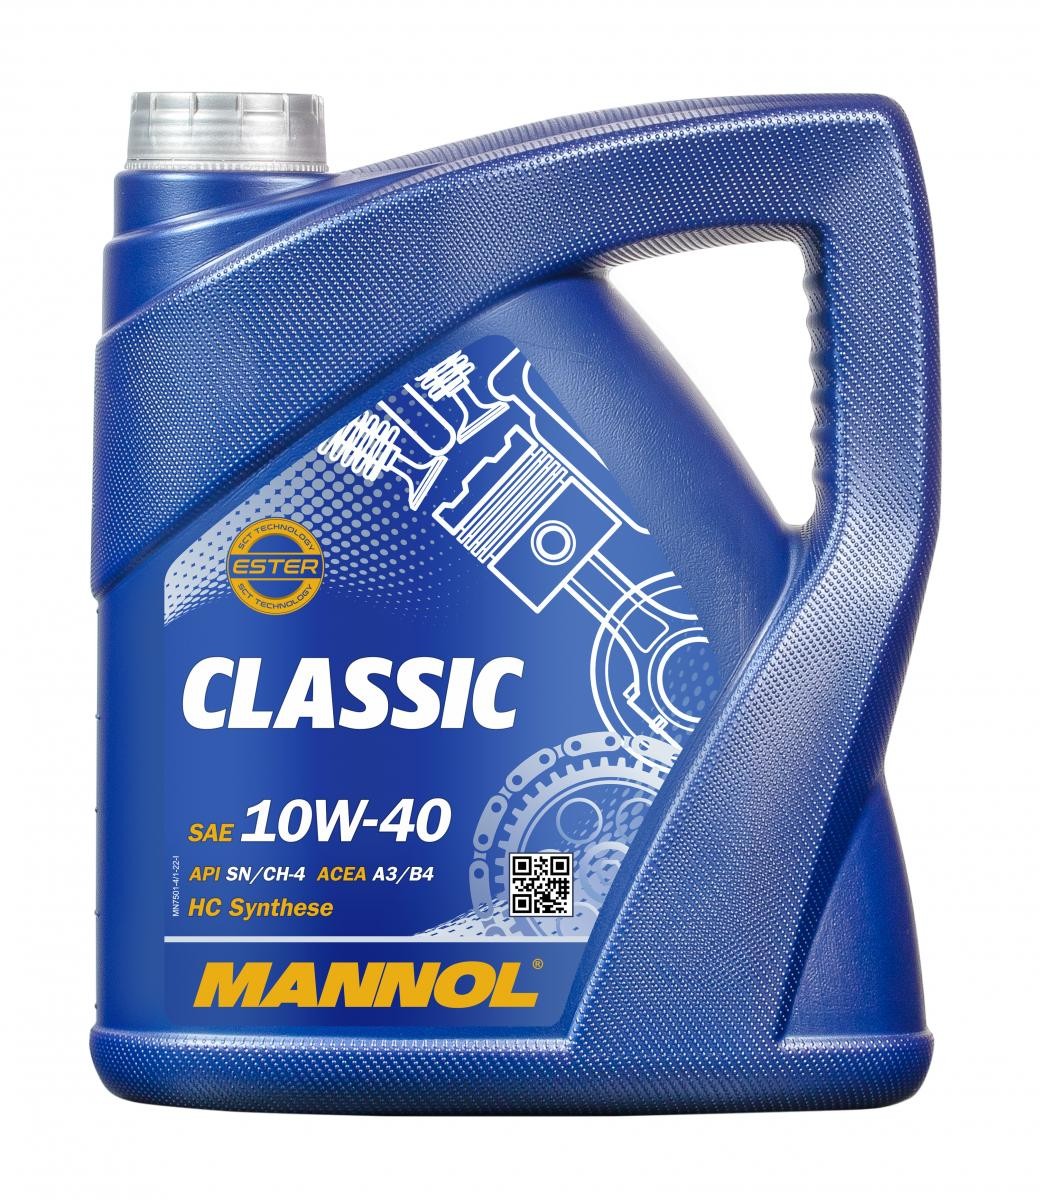 MANNOL ContiClassic 10W-40, 4l, Part Synthetic Oil Motor oil MN7501-4 buy